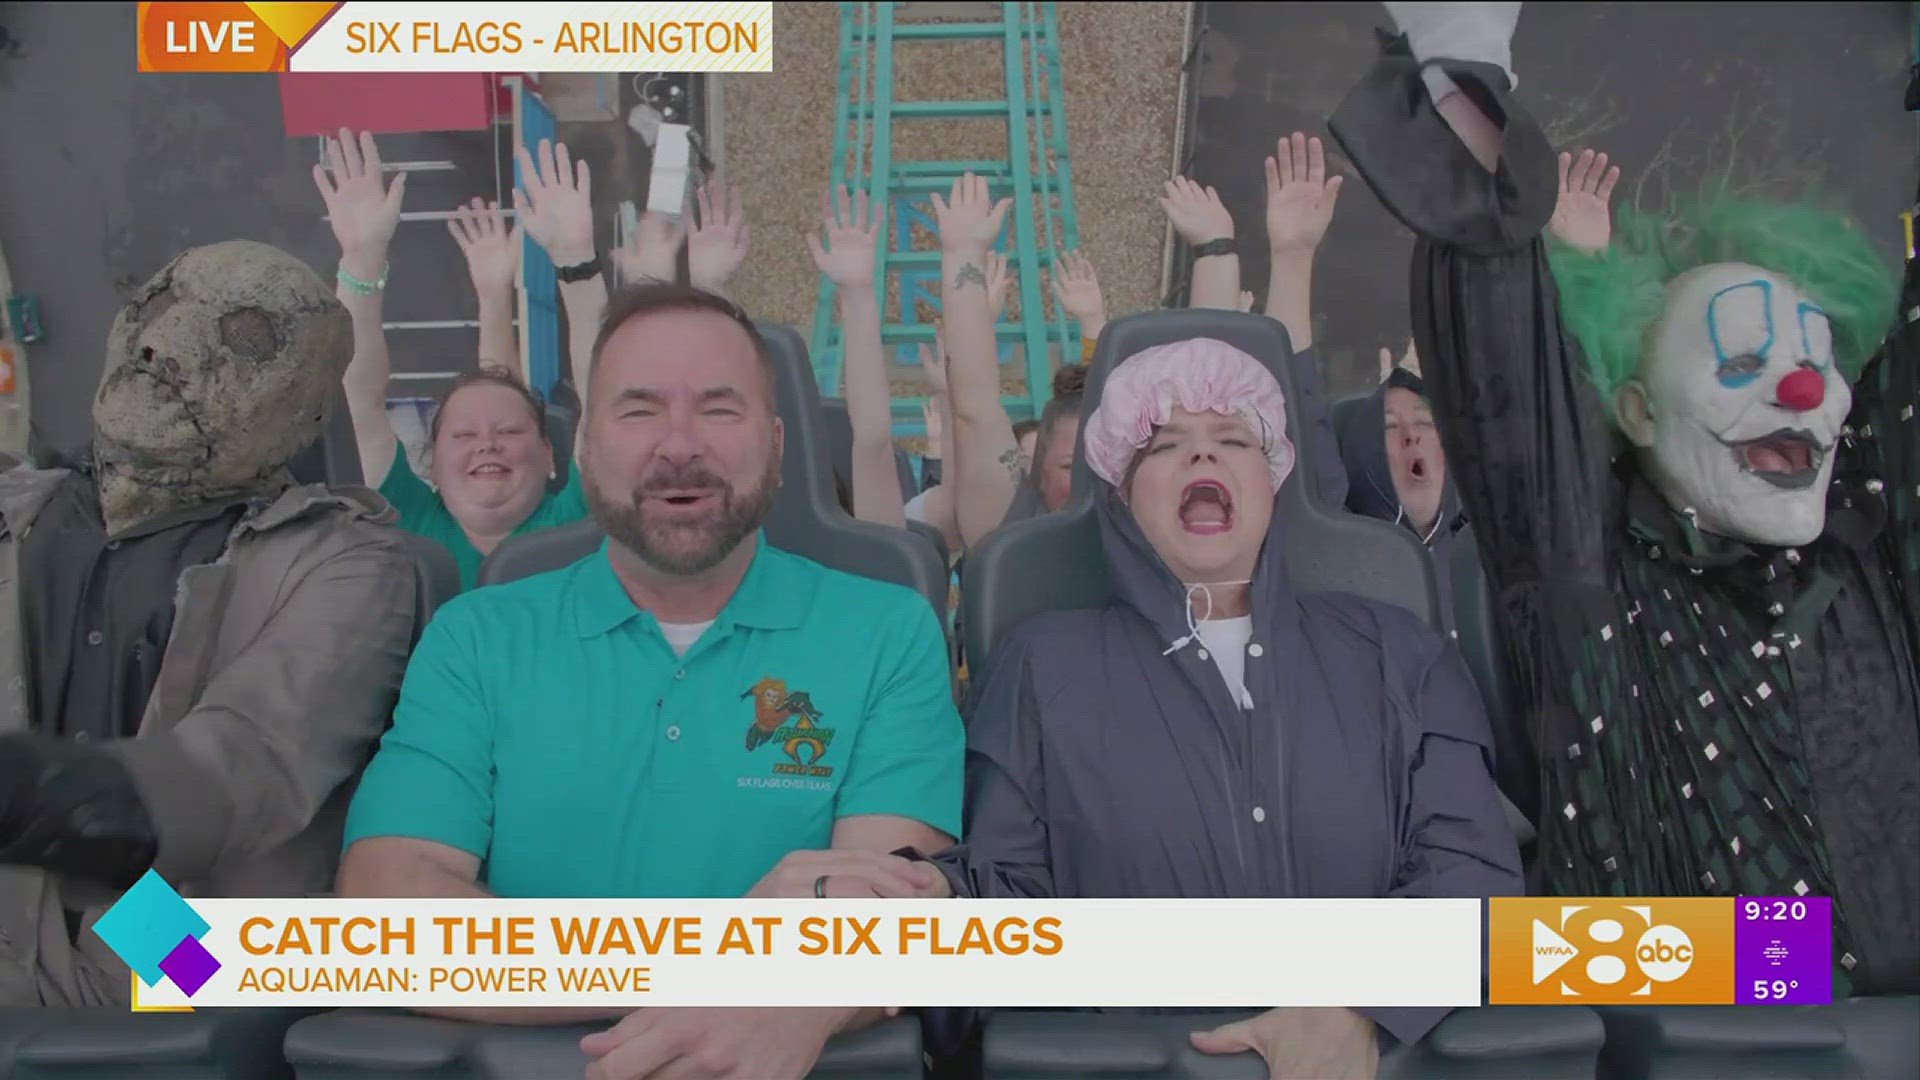 See Paige catch the wave of Six Flags over Texas' newest roller coaster AQUAMAN: Power Wave